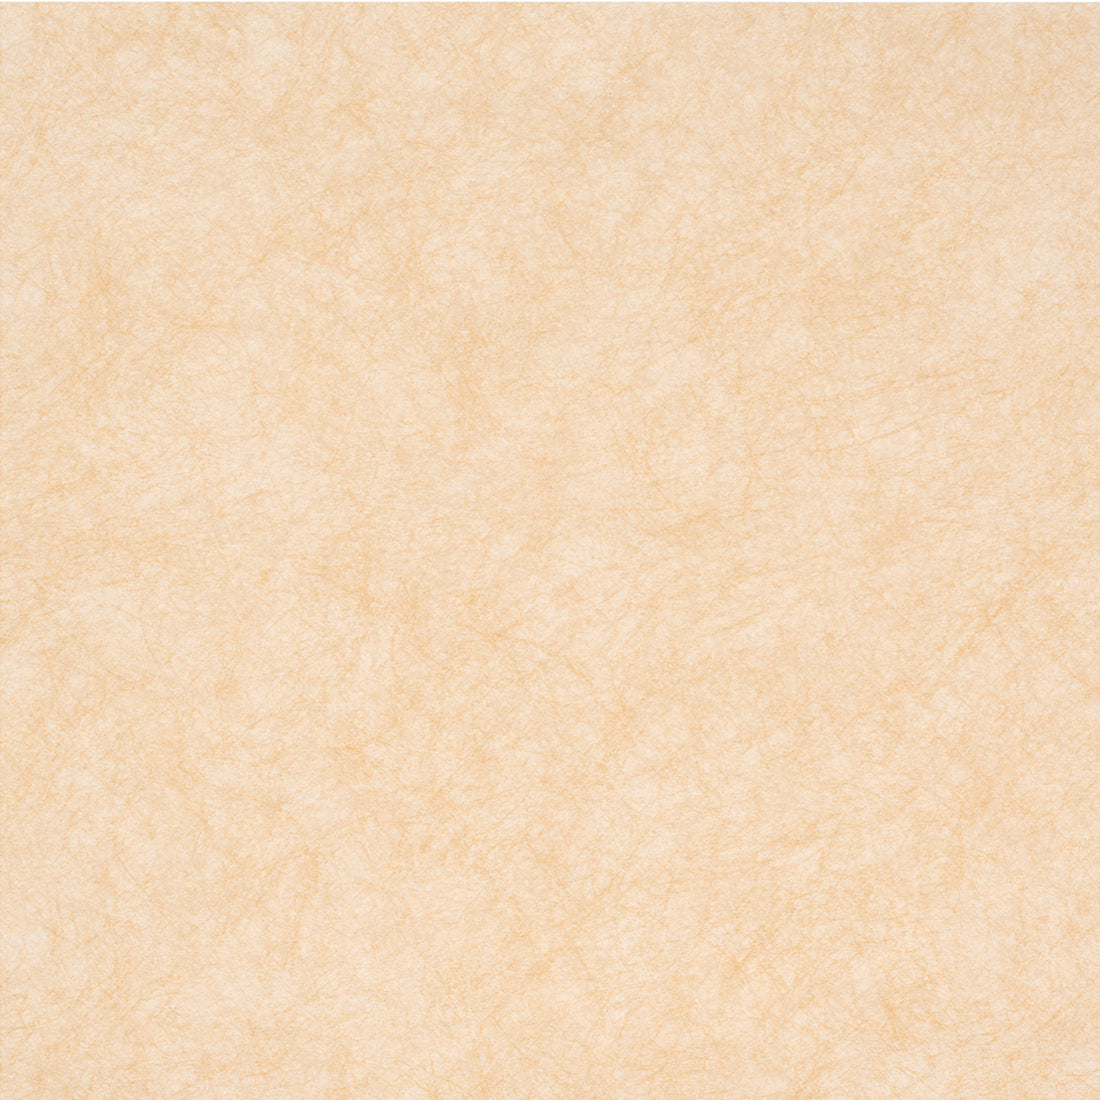 Light Gold Shimmer 12x12 specialty paper from American Crafts